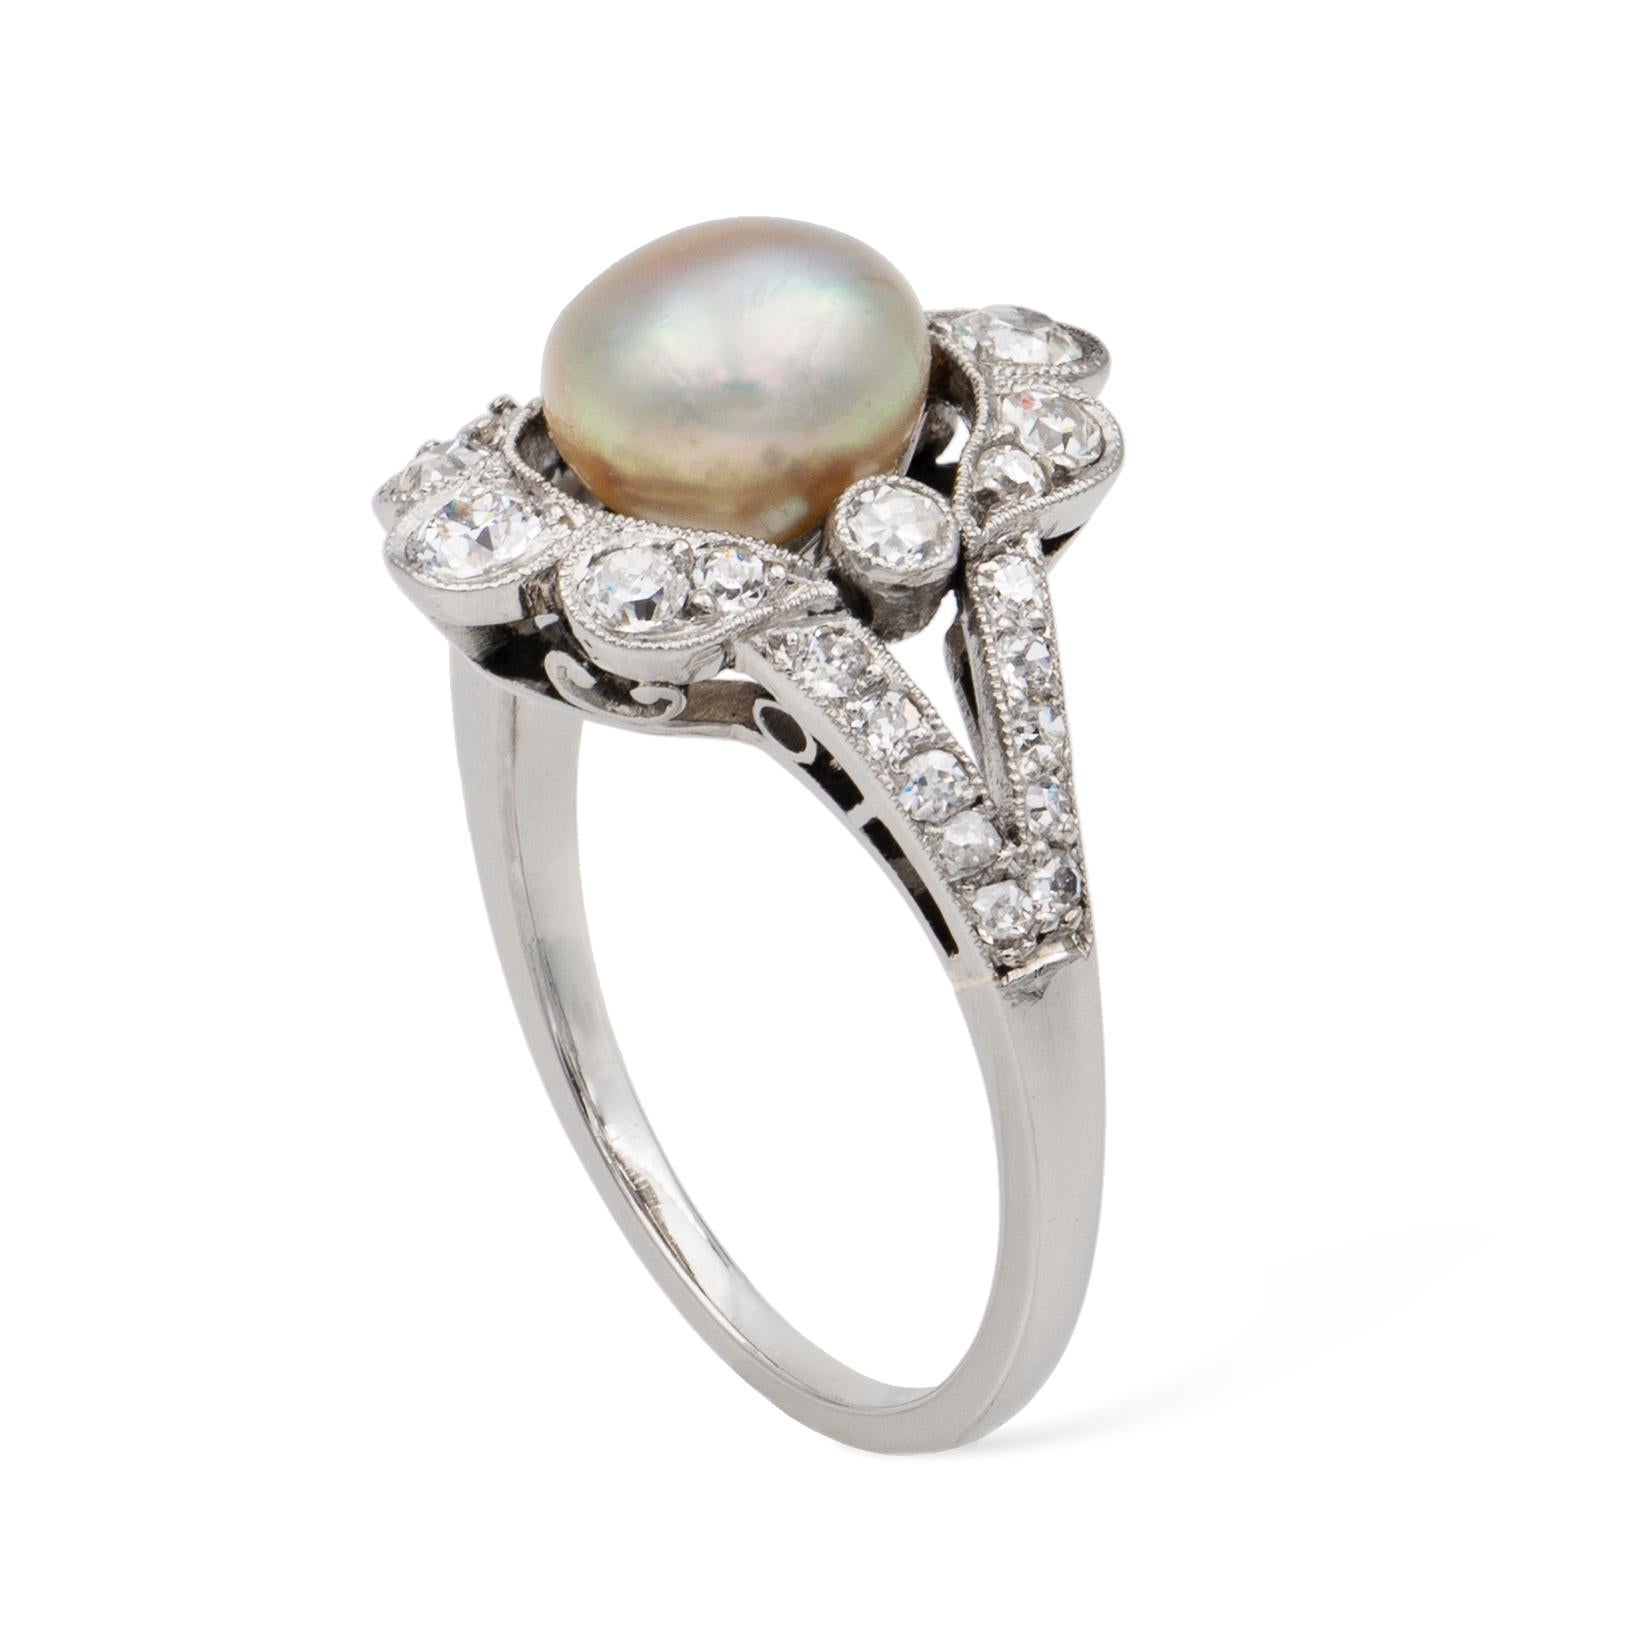 A Belle Époque natural pearl and diamond ring, to the centre a button-shaped pearl measuring 6.8 x 5.1mm, accompanied by GCS Report 79217-37 stating to be natural of saltwater origin, surrounded by old-brilliant and swiss-cut diamonds, to split